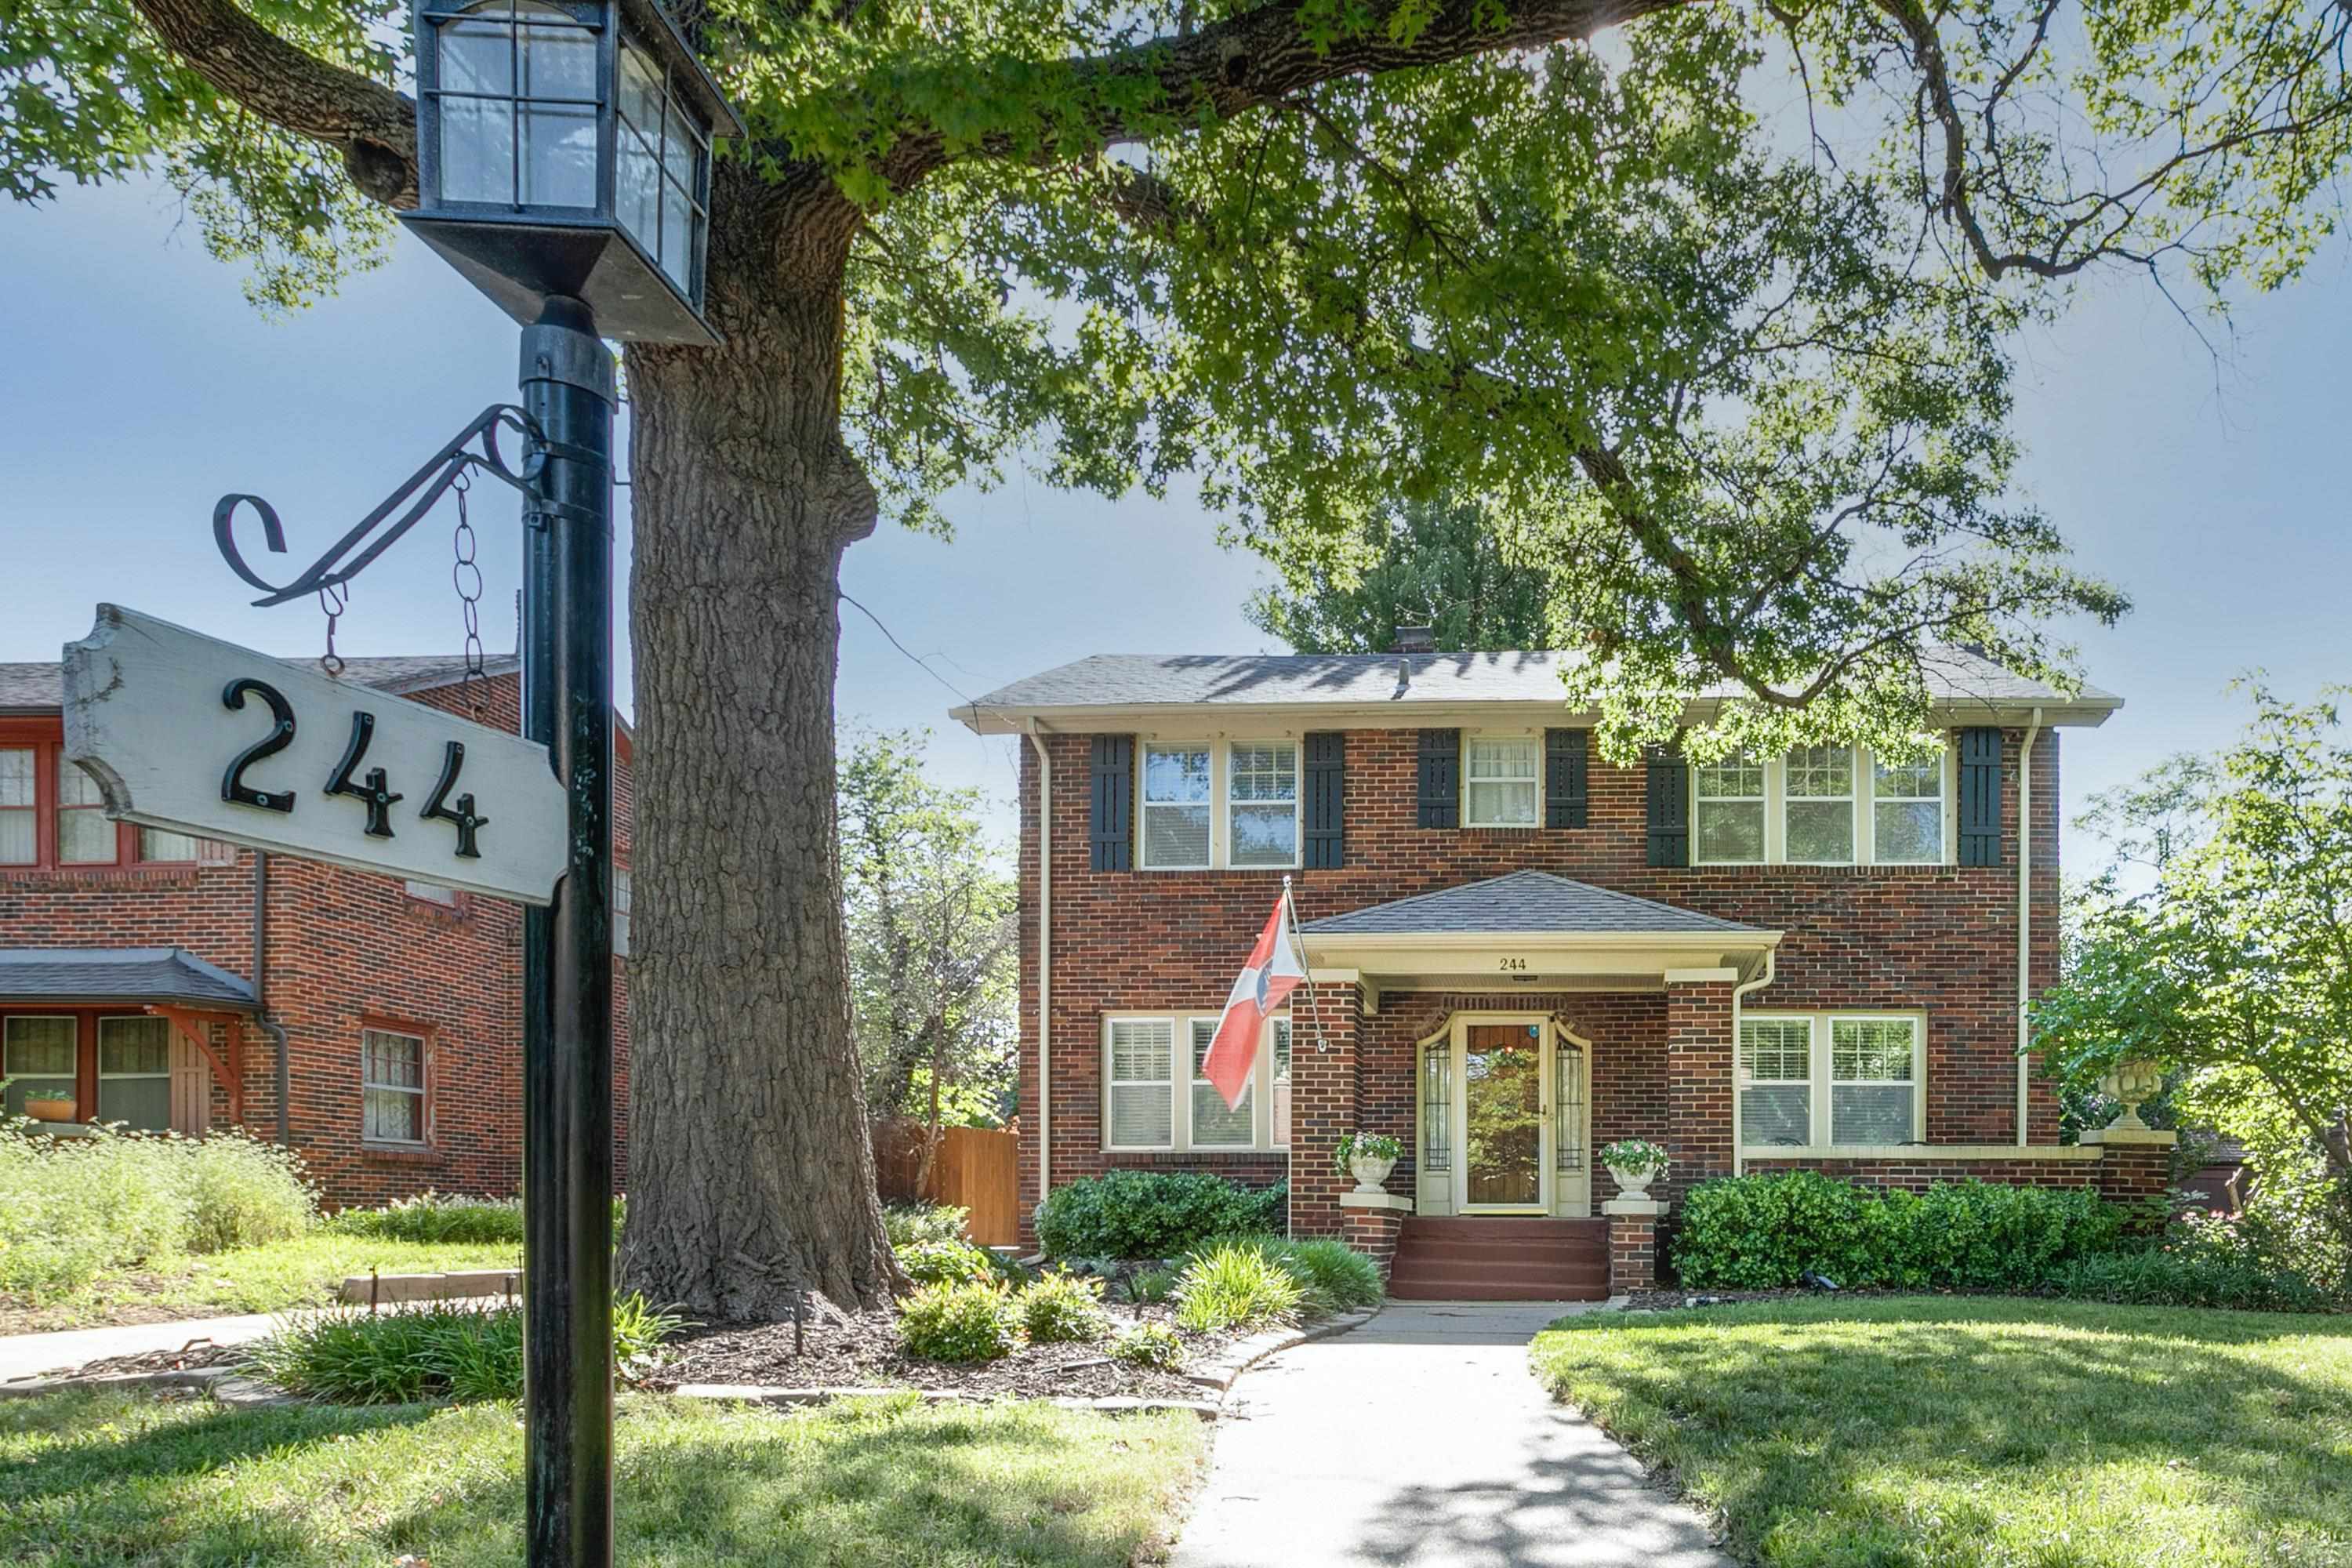 This is a beautiful College Hill home with historic details and new upgrades to make it comfortable 